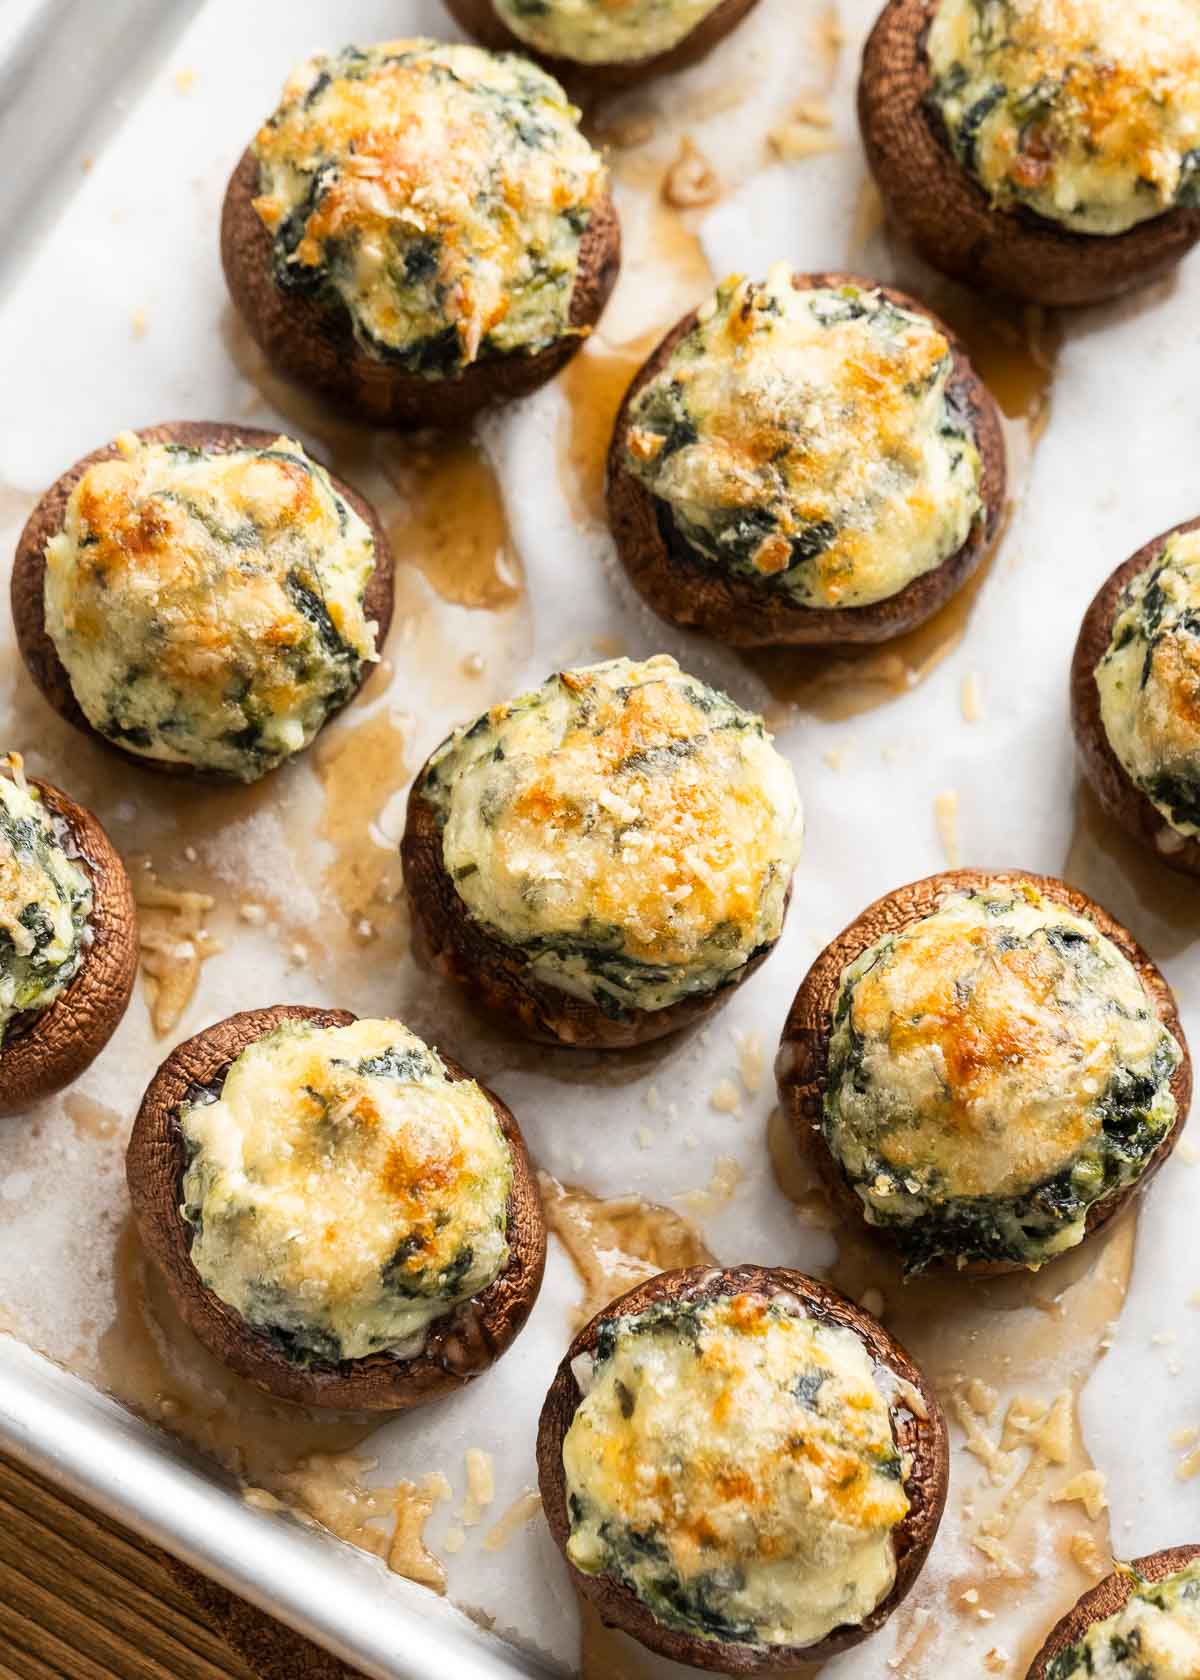 cooked stuffed mushrooms with spinach and parmesan